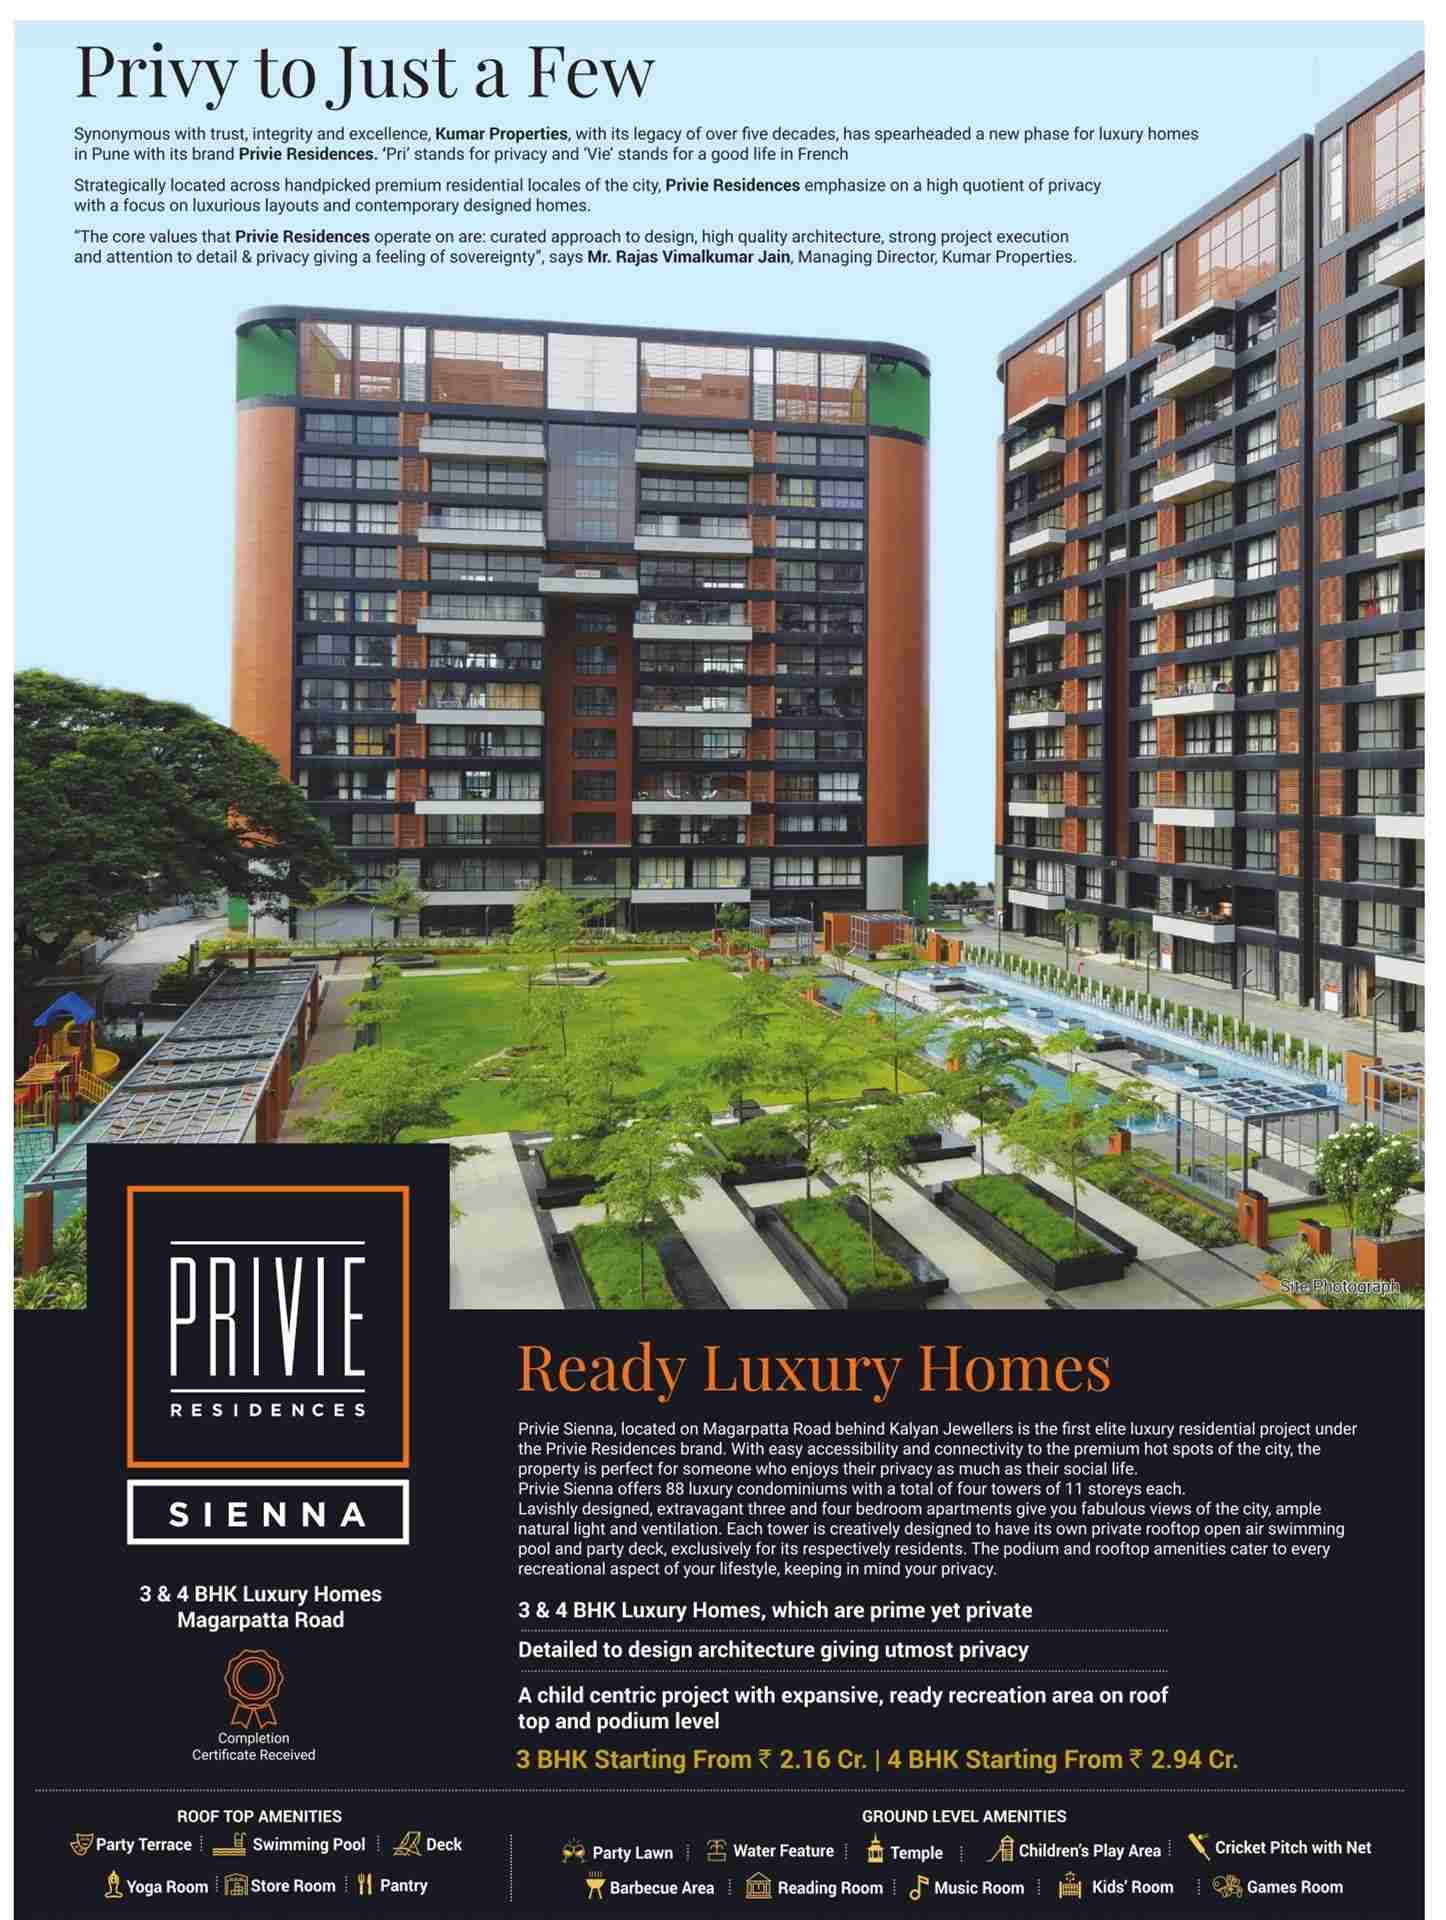 Ready luxury homes with world class amenities at Privie Sienna in Pune